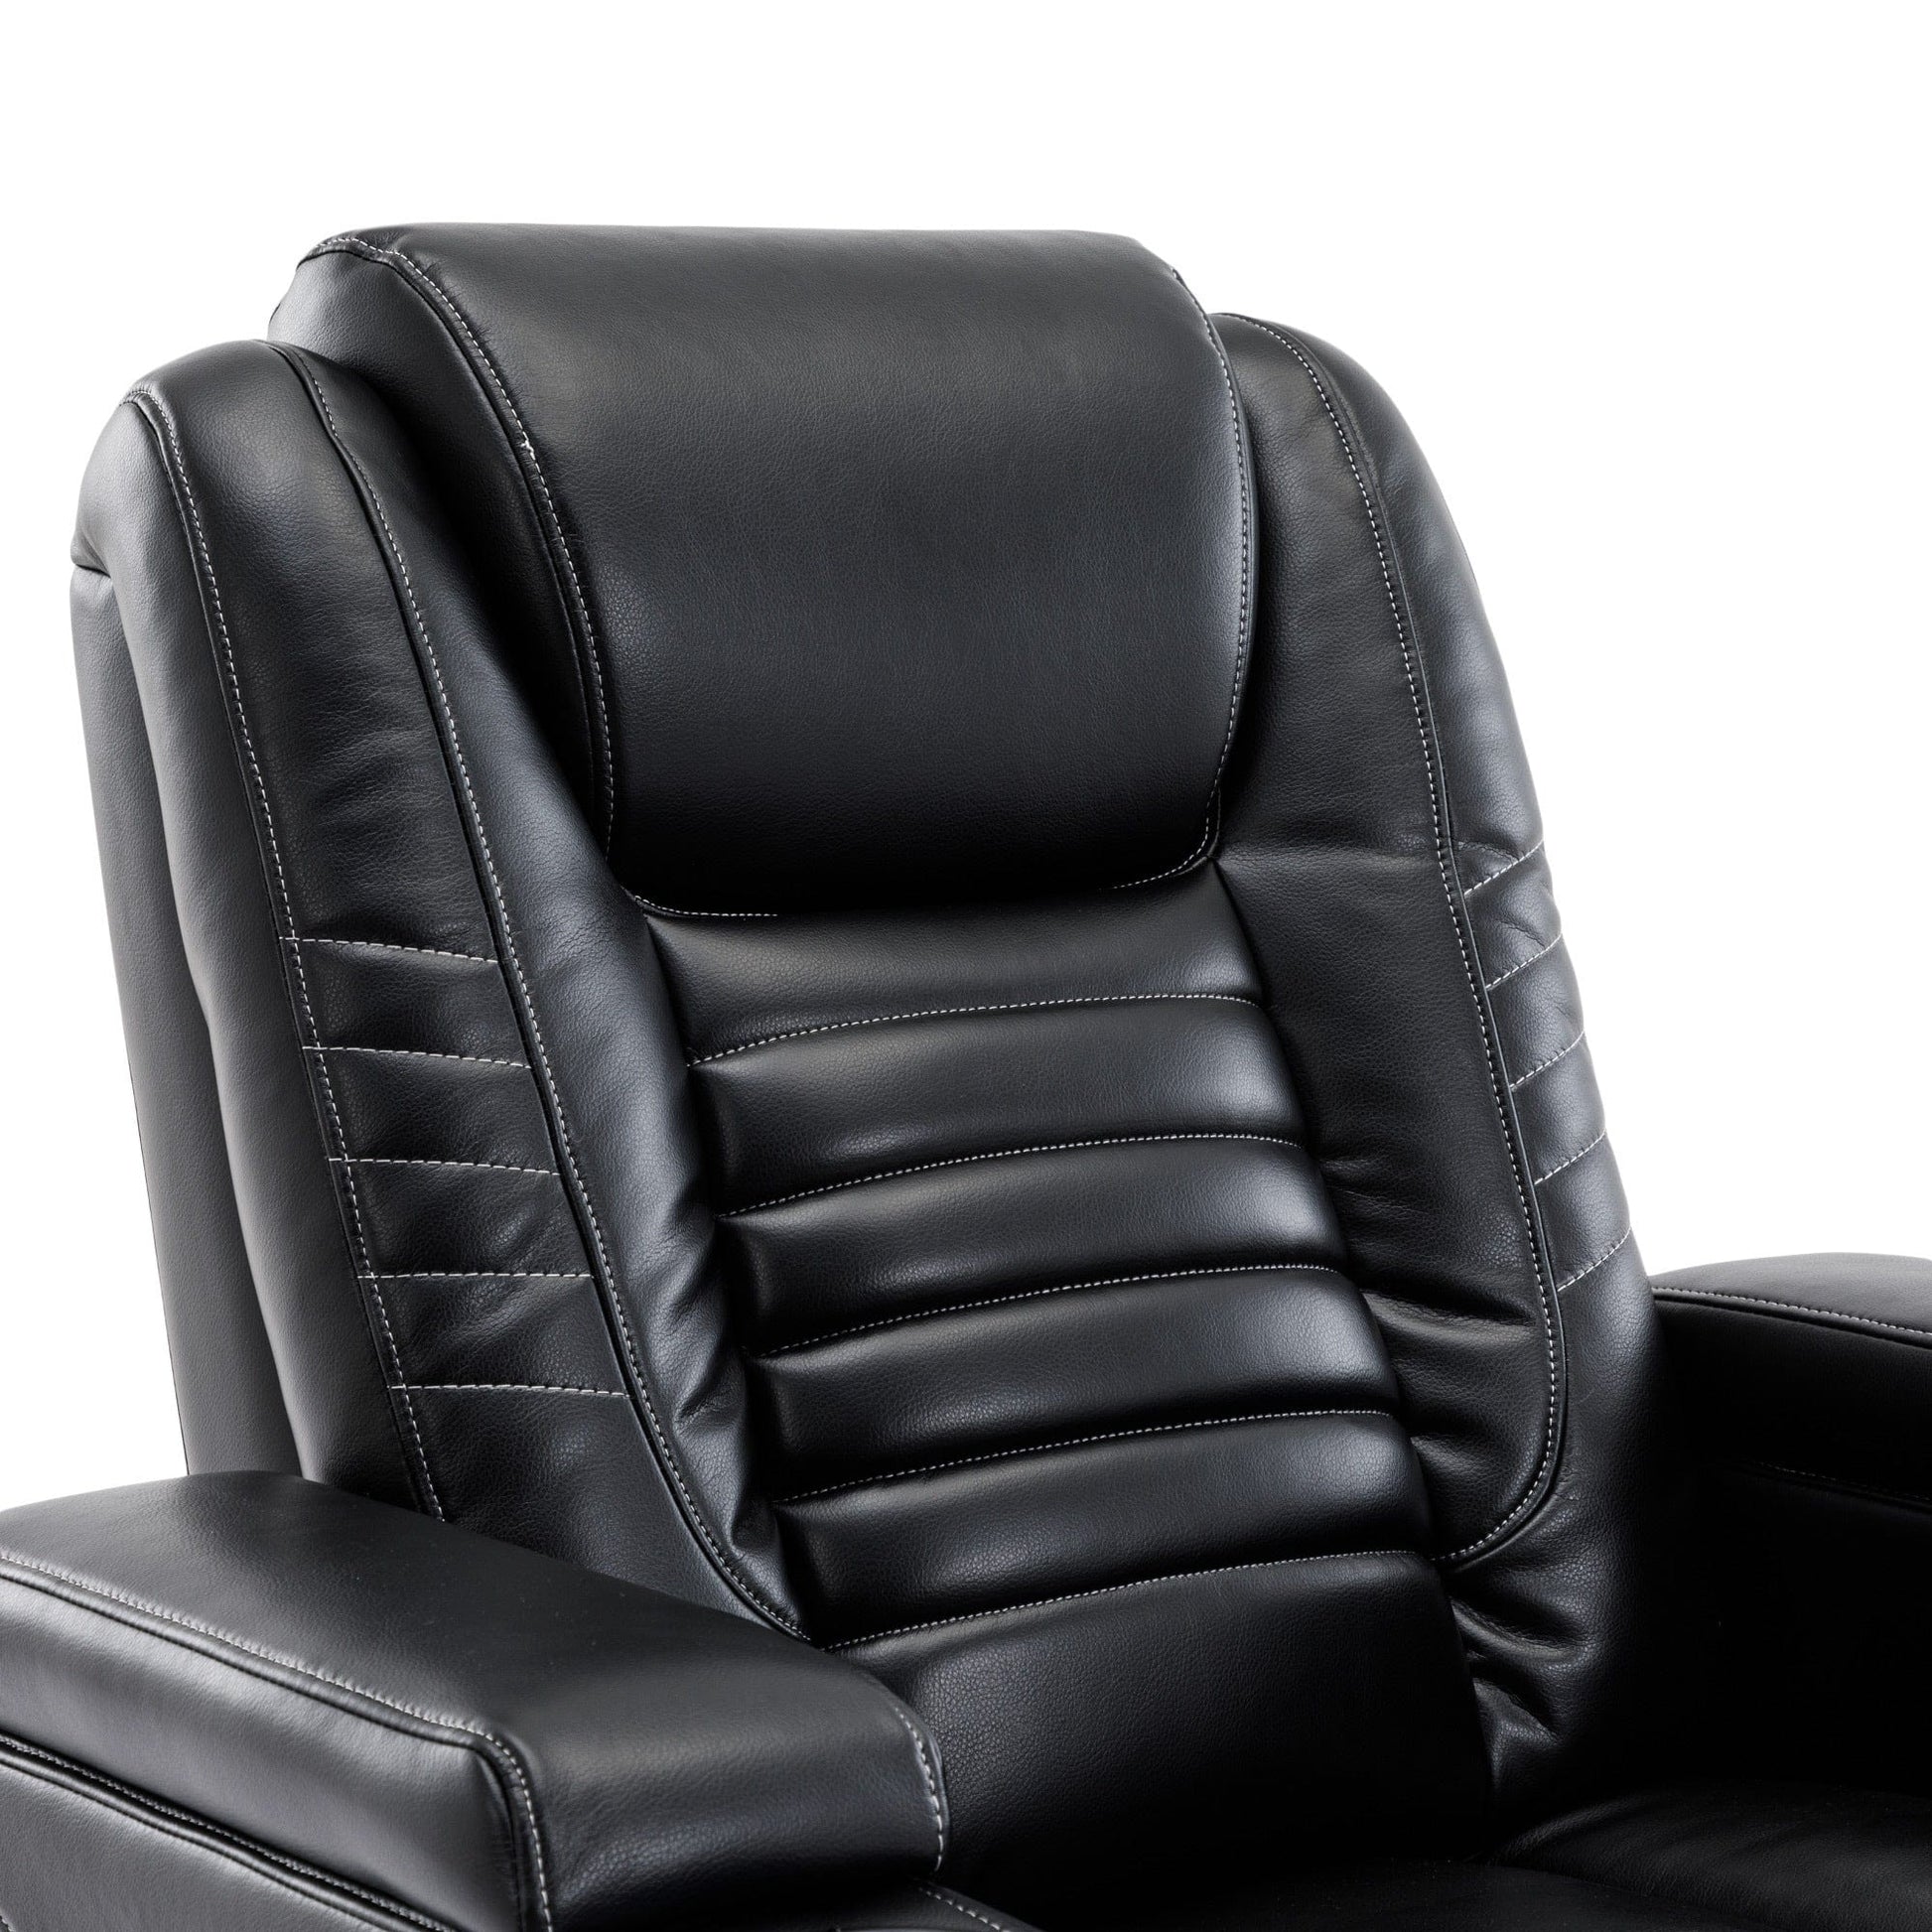 1st Choice Furniture Direct Recliner Chair 1st Choice Home Theater Seating with Power Motion/ Adjustable Headrest